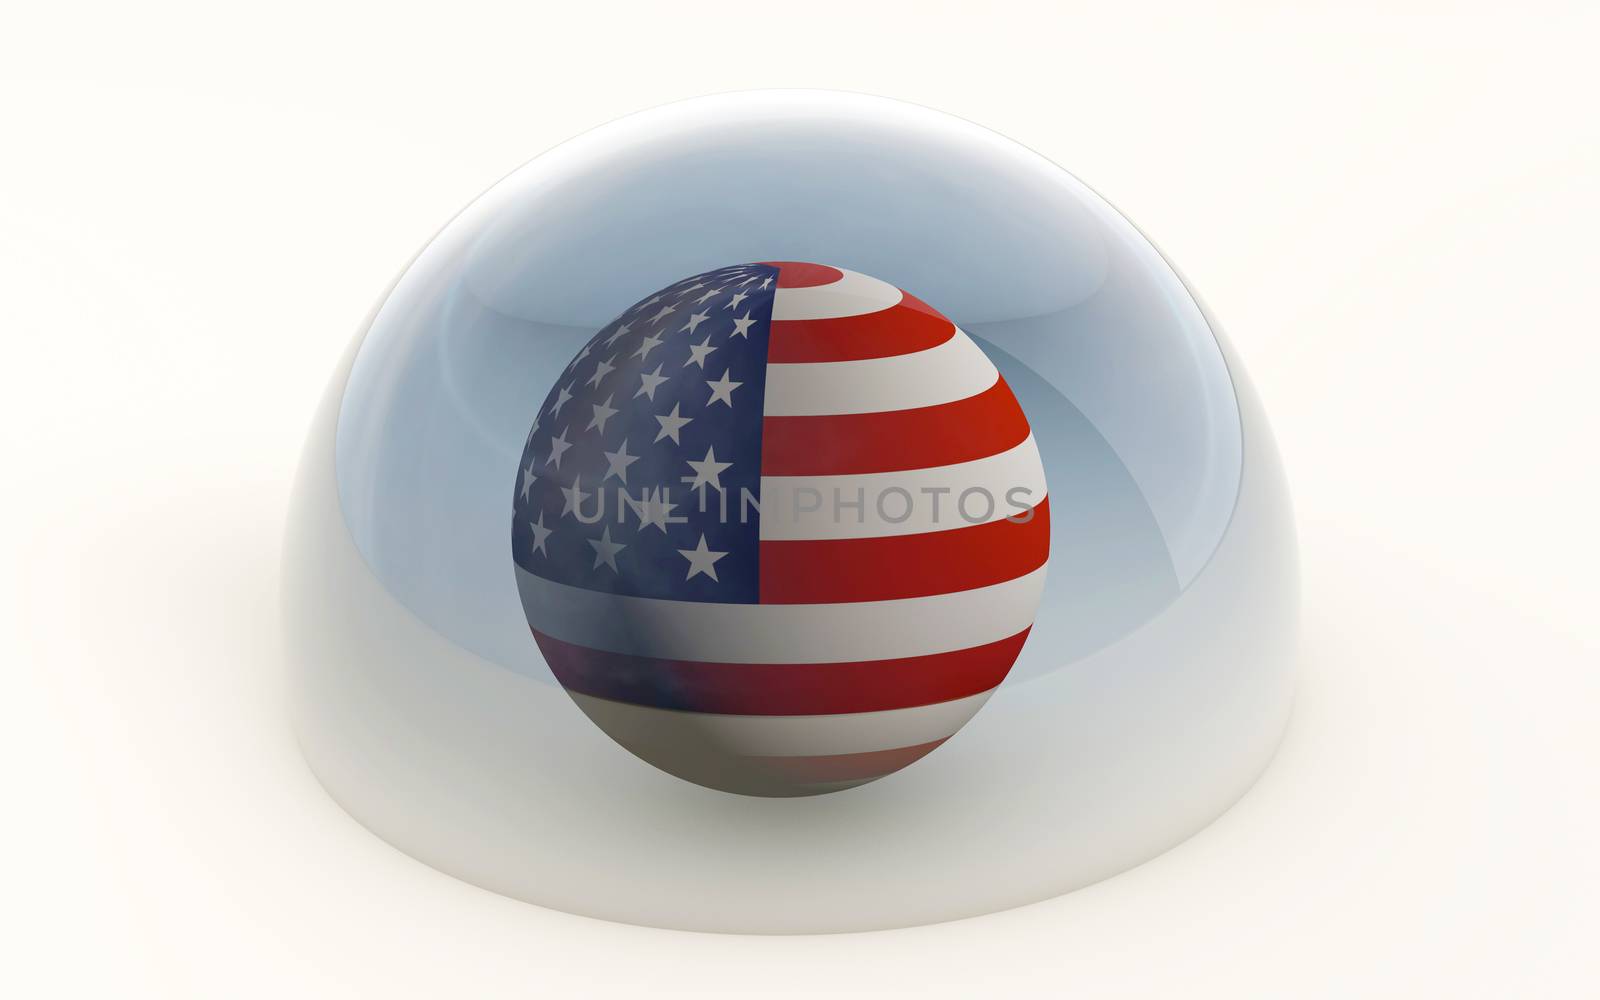 3d rendering of the united states flag protected under a glass dome i by F1b0nacci